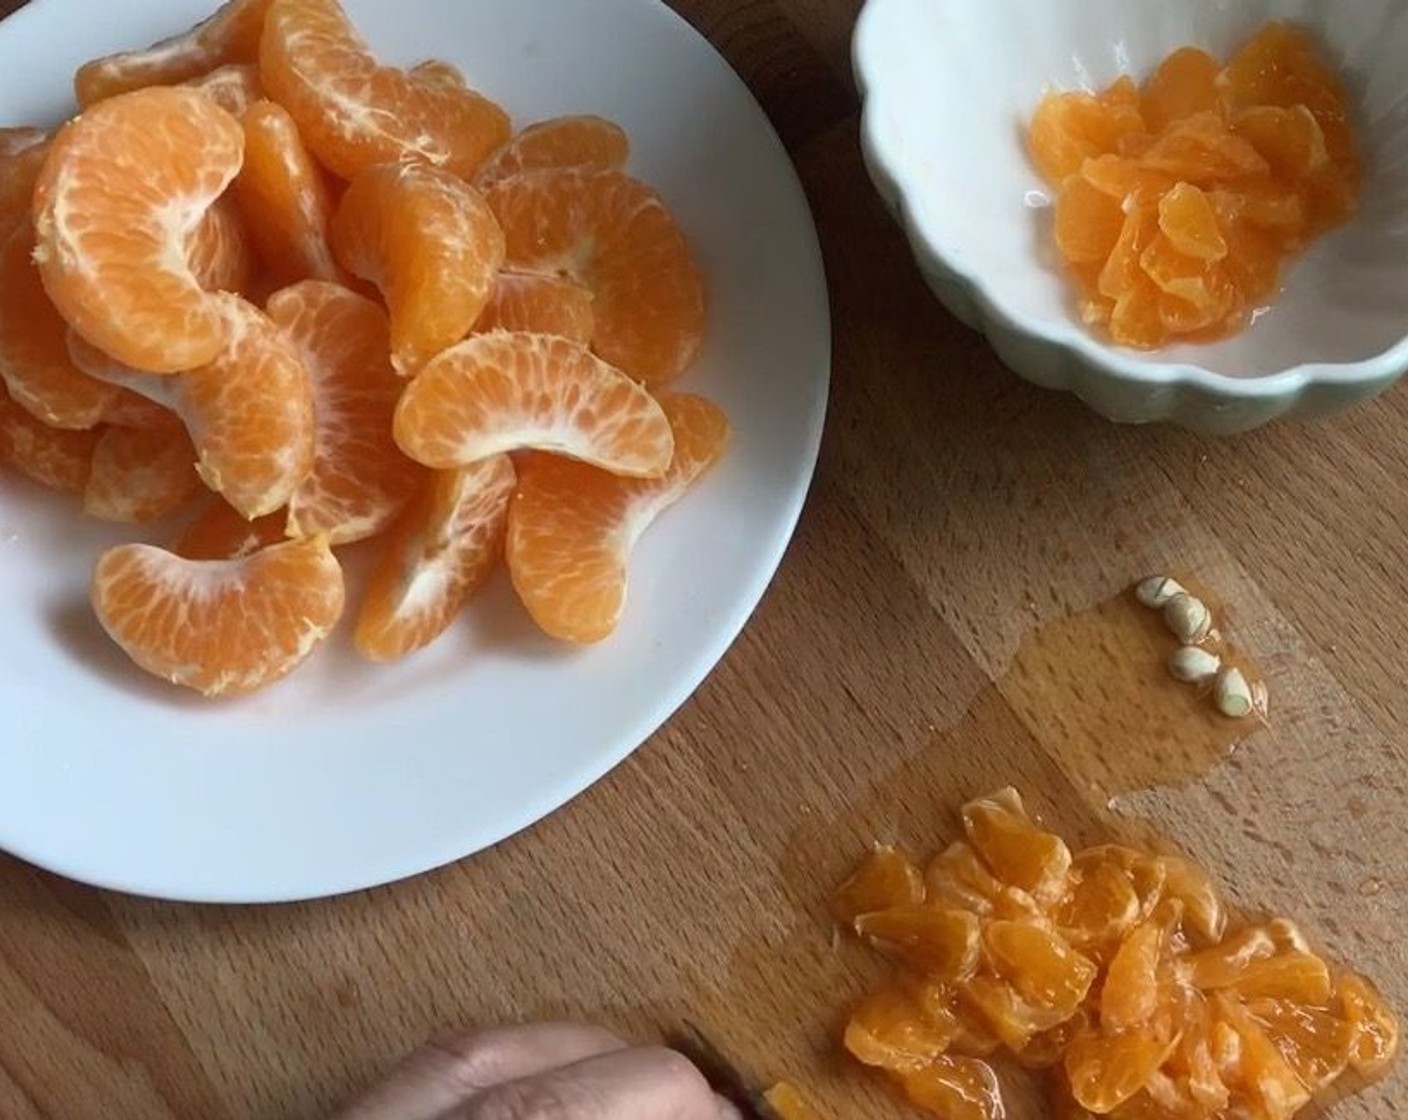 step 3 Then, using a sharp knife, cut the segmented mandarin oranges into small pieces and set aside.